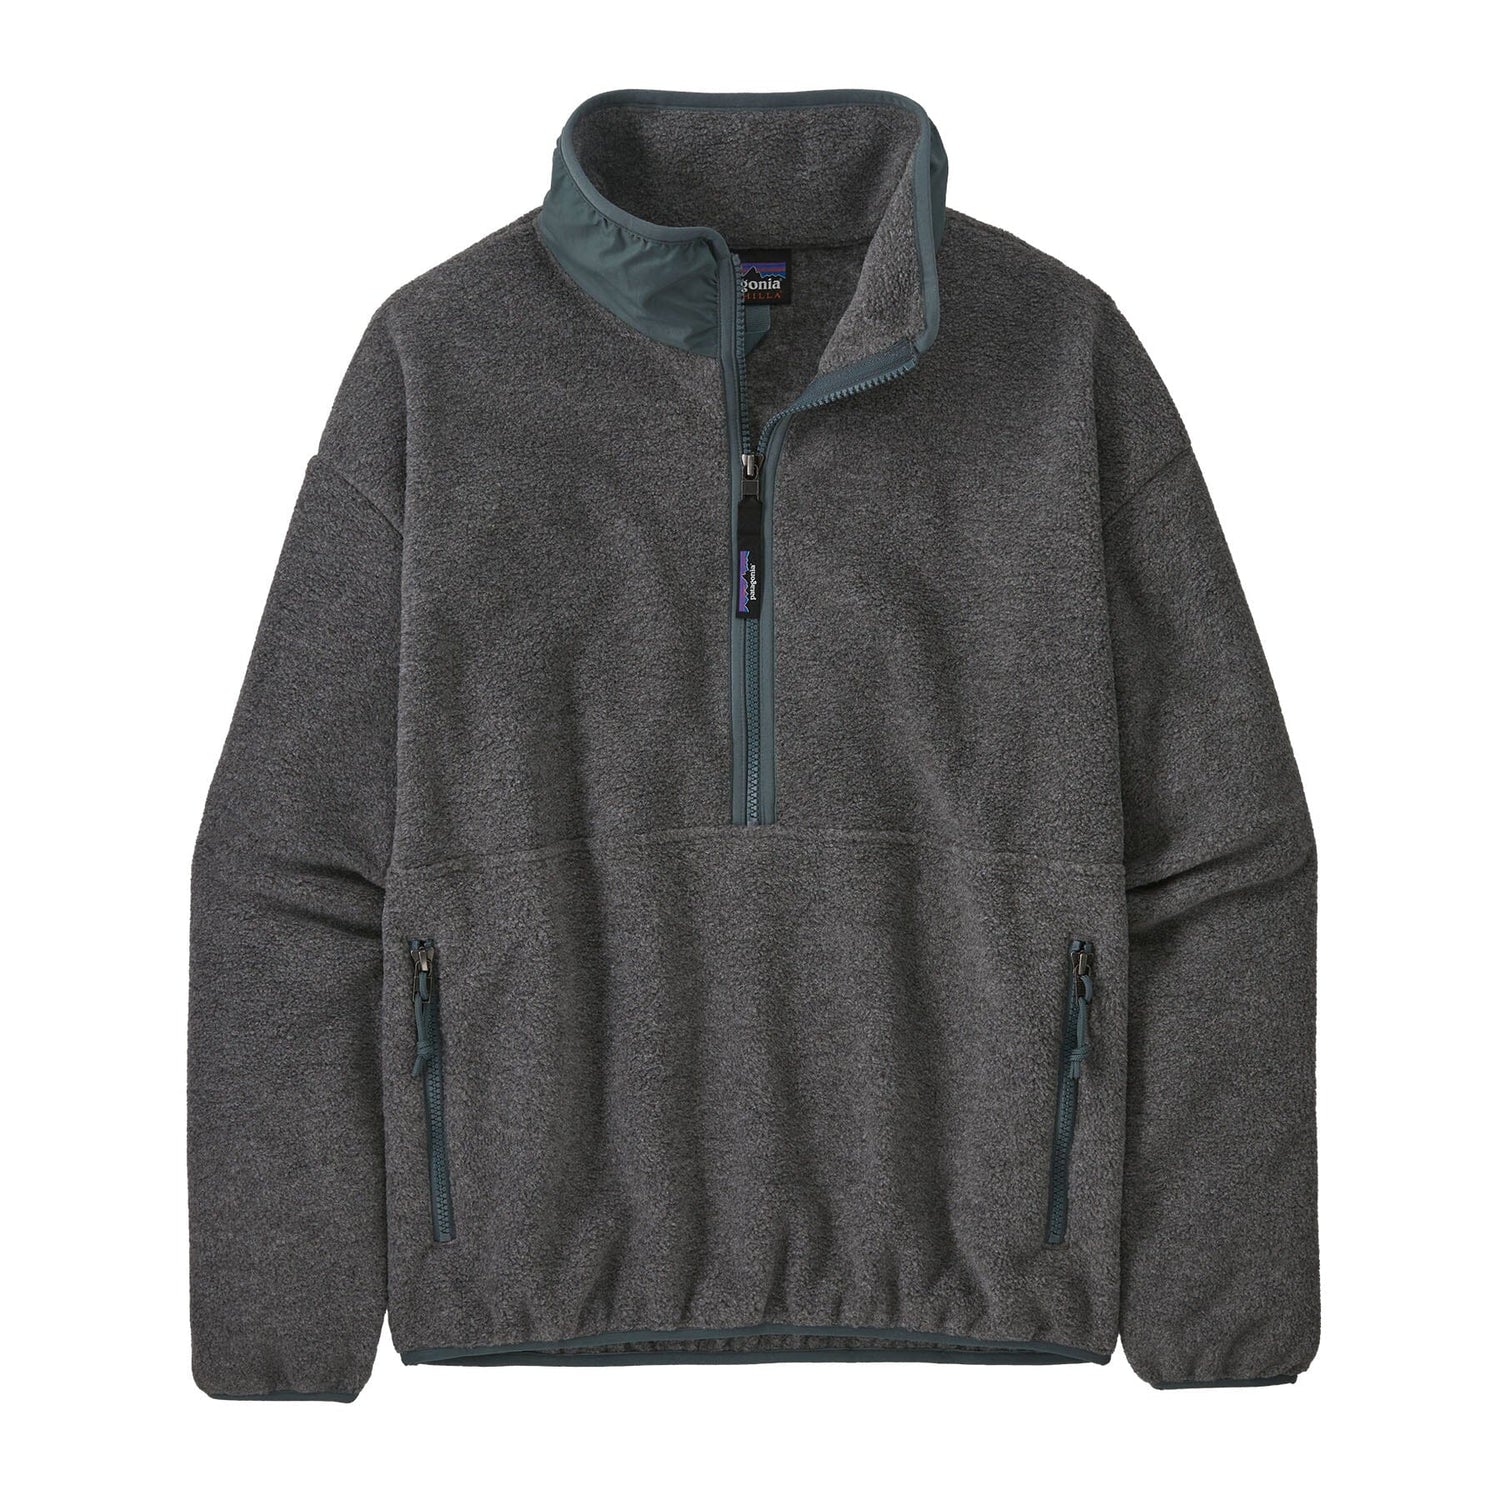 Patagonia W's Synch Fleece Marsupial - 100% Recycled Polyester Nickel w Nouveau Green Shirt